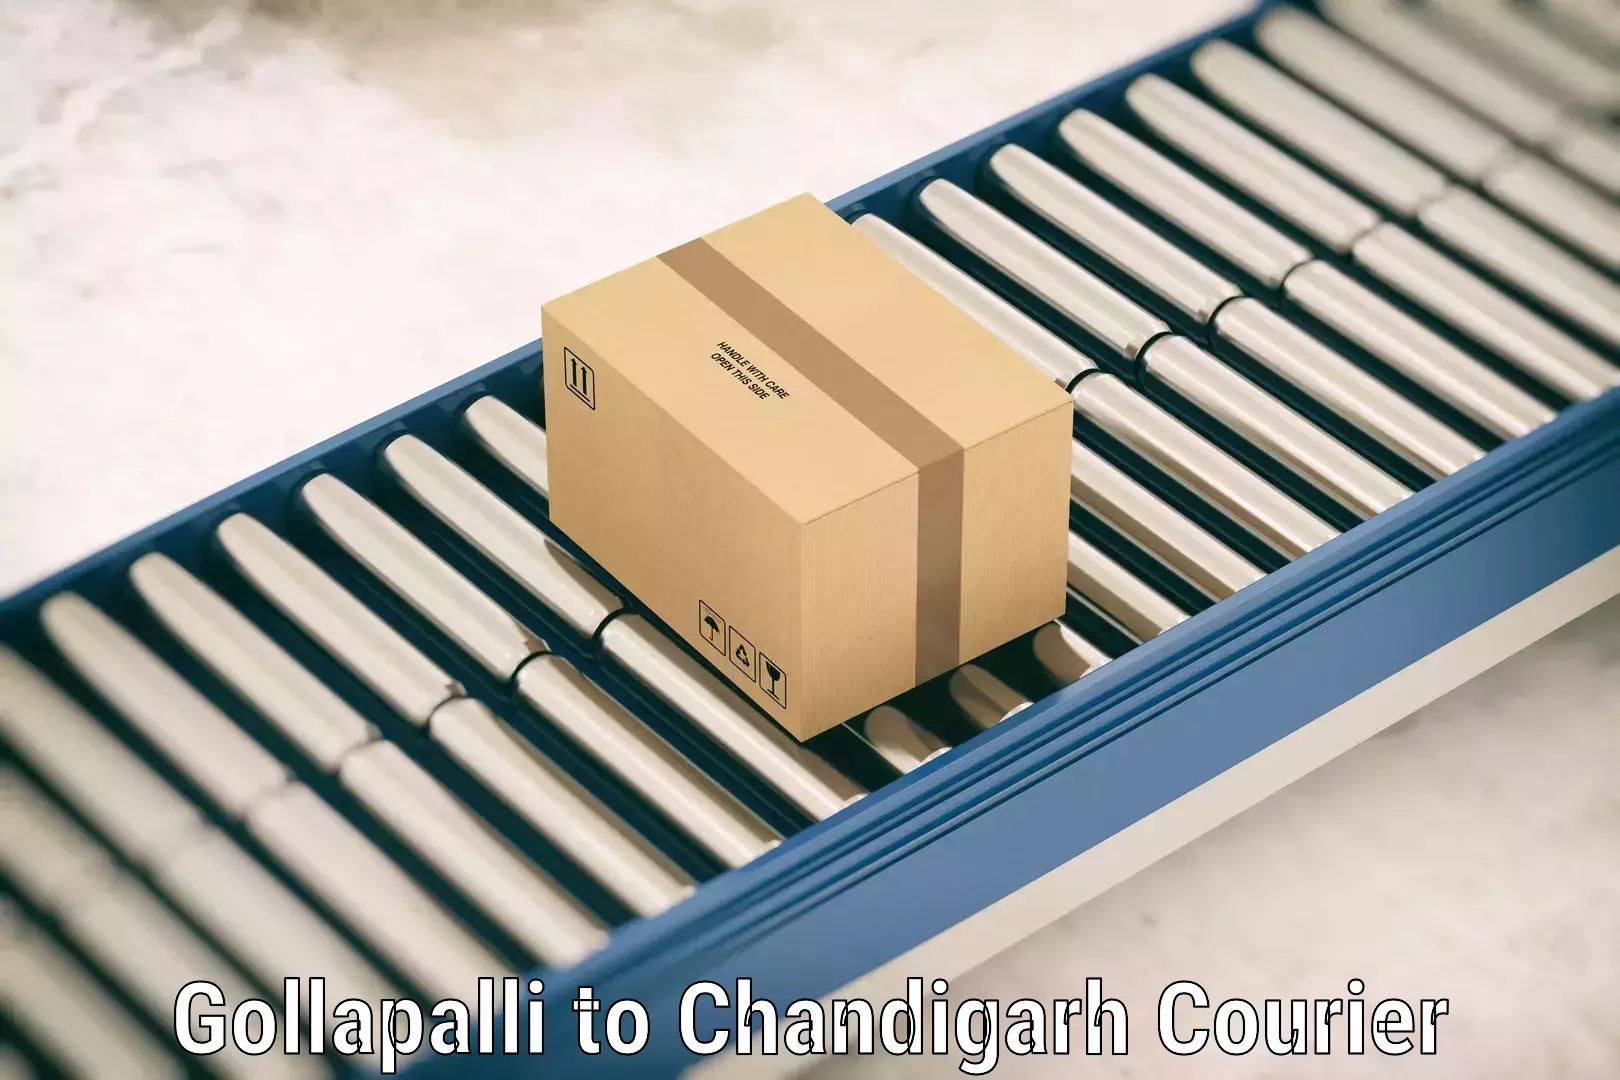 Baggage delivery technology Gollapalli to Chandigarh